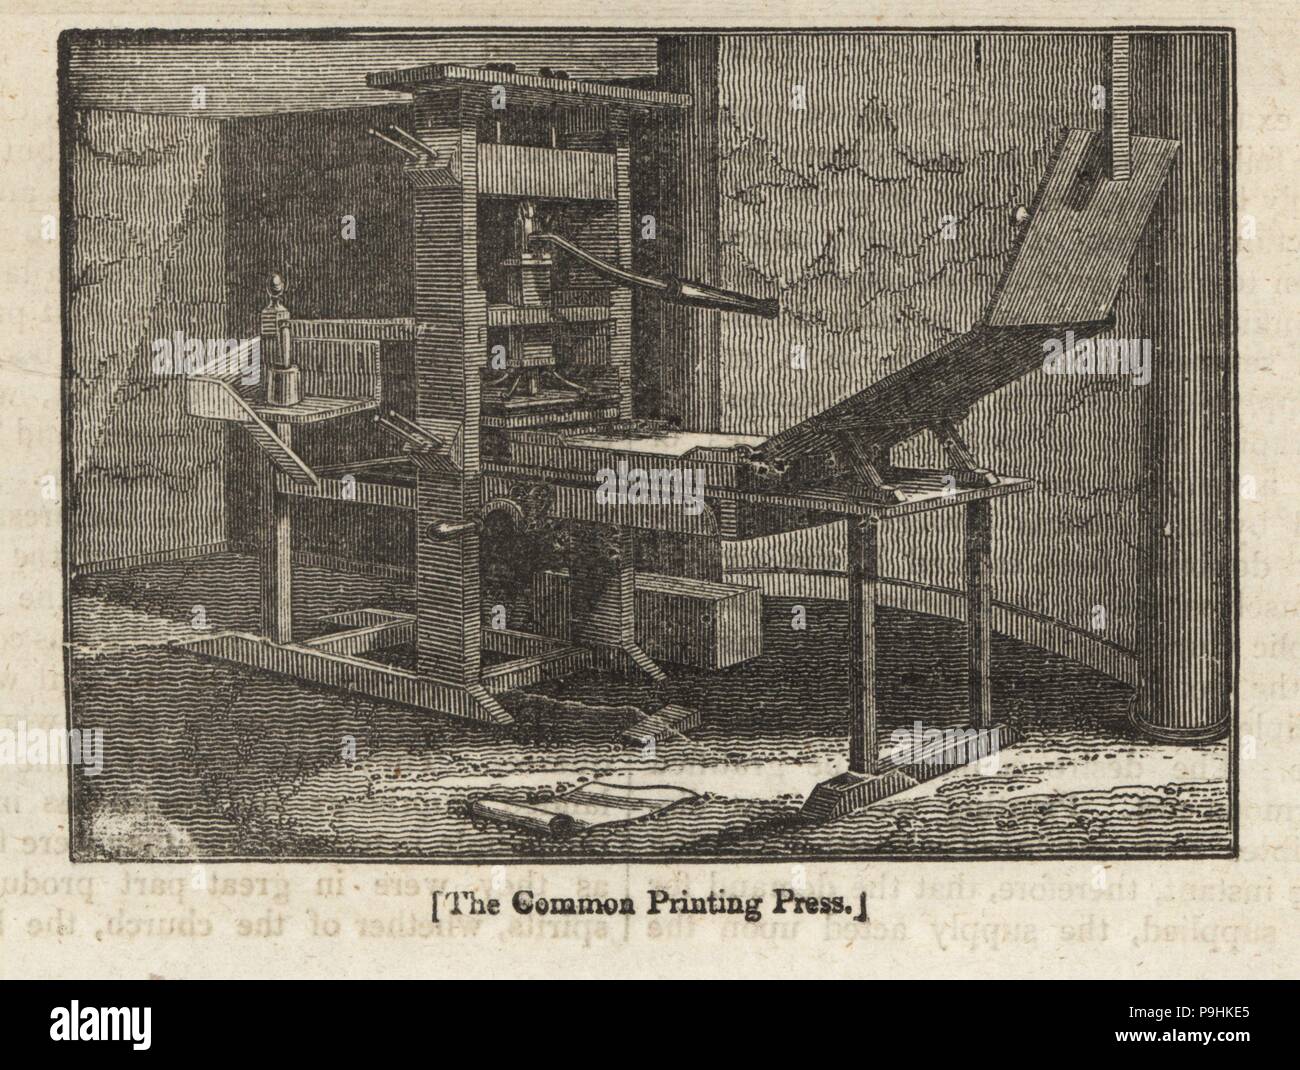 Willem Jansen Blaew's new-fashioned printing press commonly used in Europe in the early 19th century. Woodblock engraving from the Penny Magazine, Society for the Diffusion of Useful Knowledge, 1833. Stock Photo